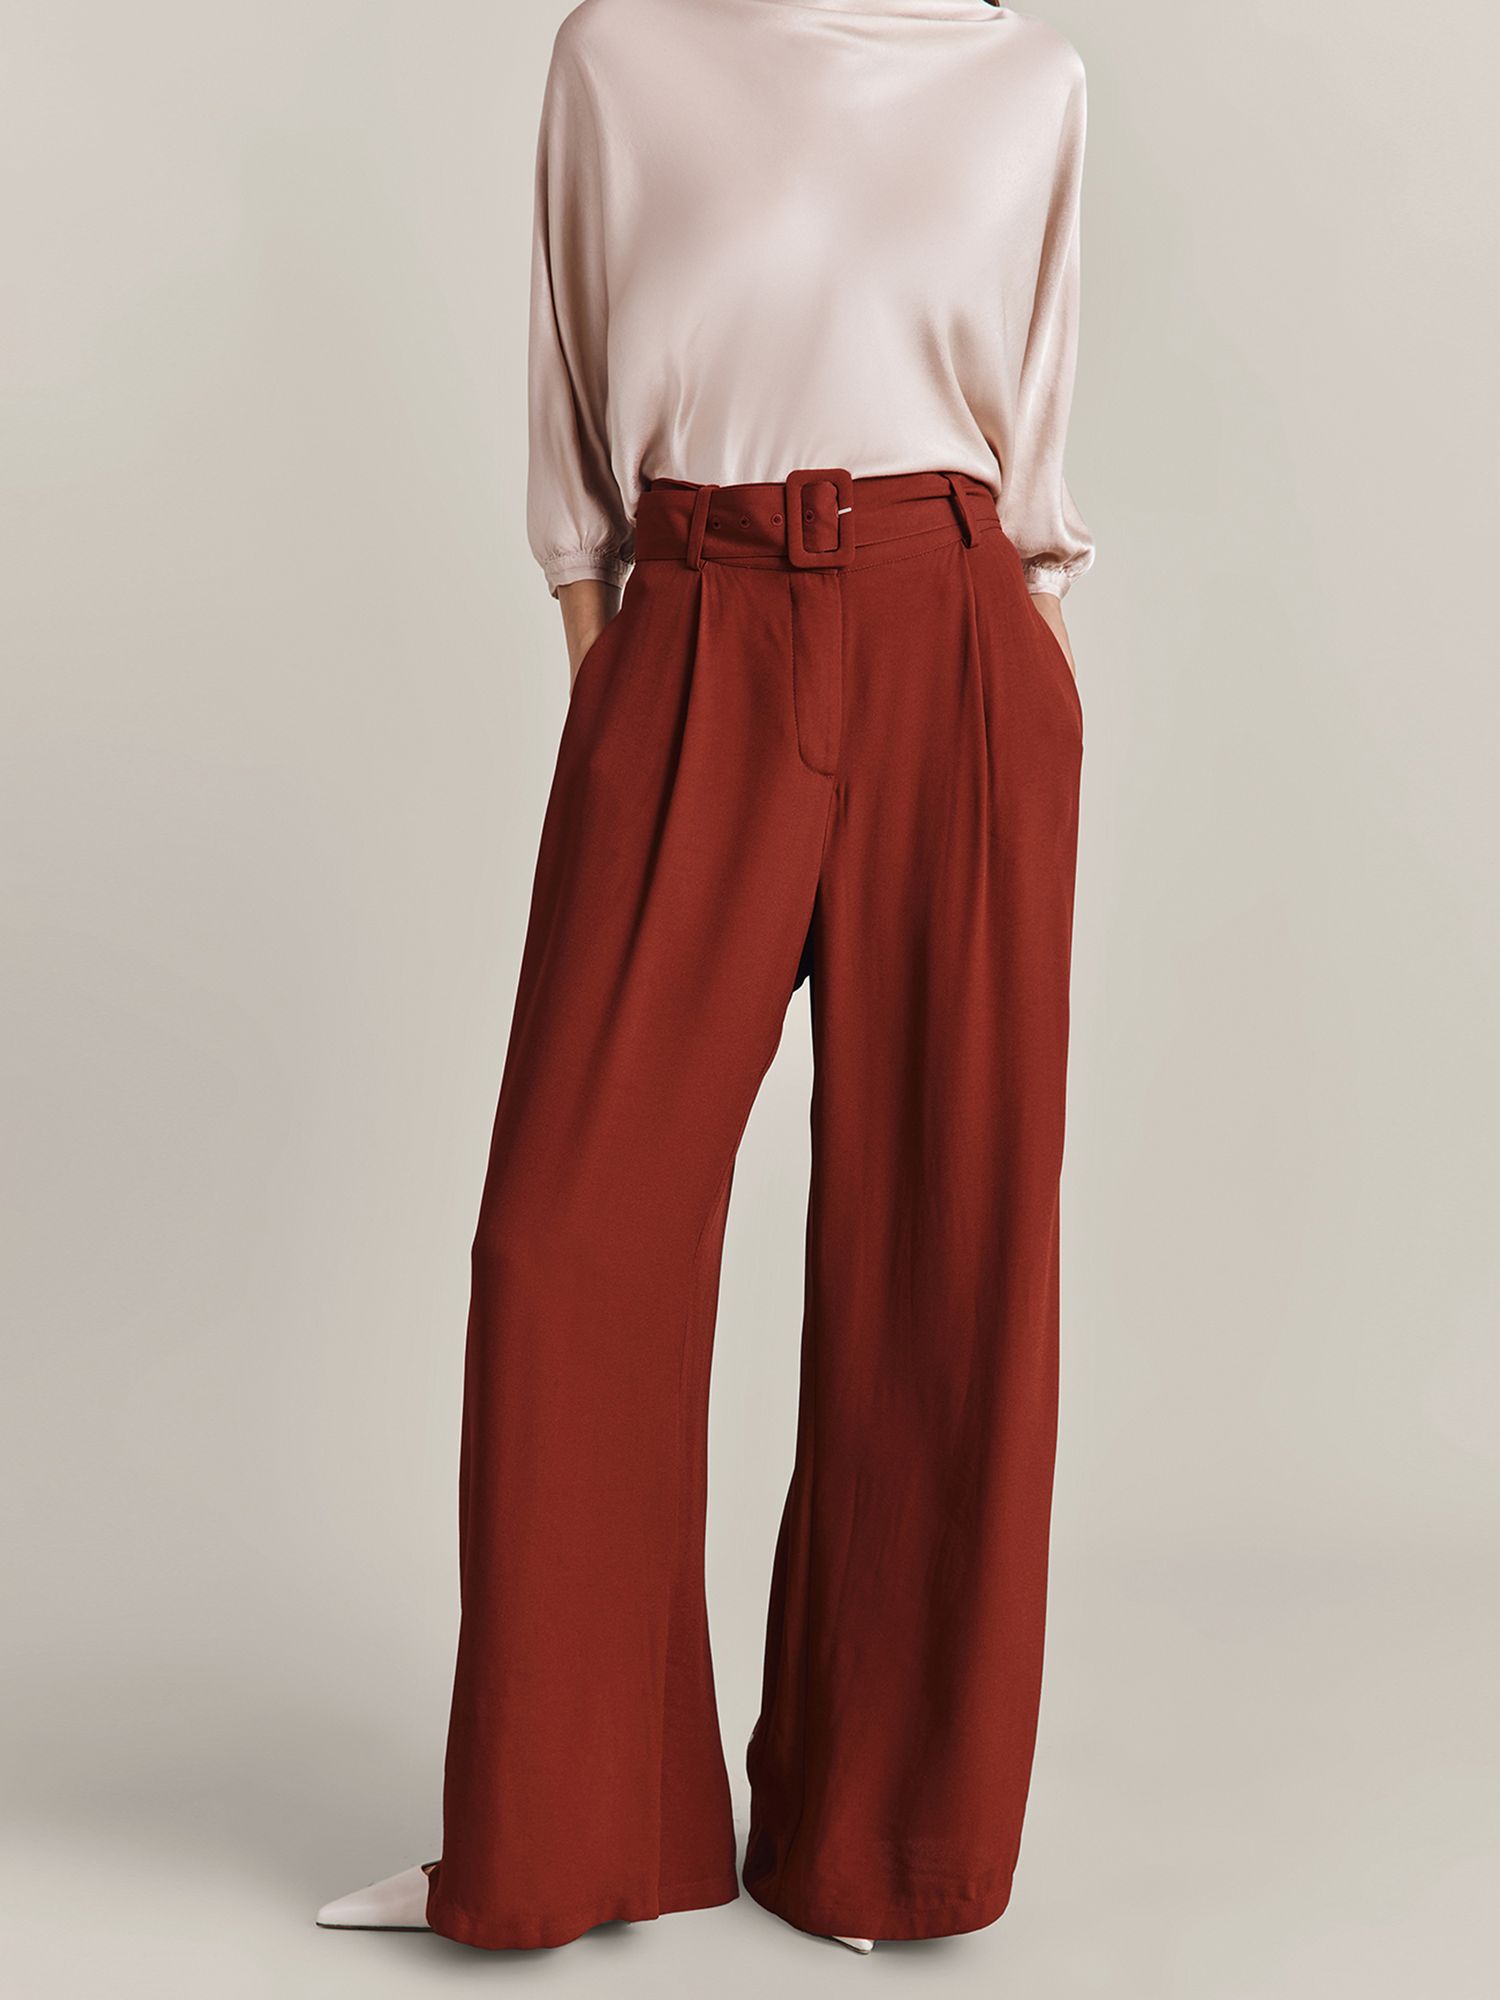 Chic Red Pants - High Waisted Pants - Red Trousers - $37.00 - Lulus